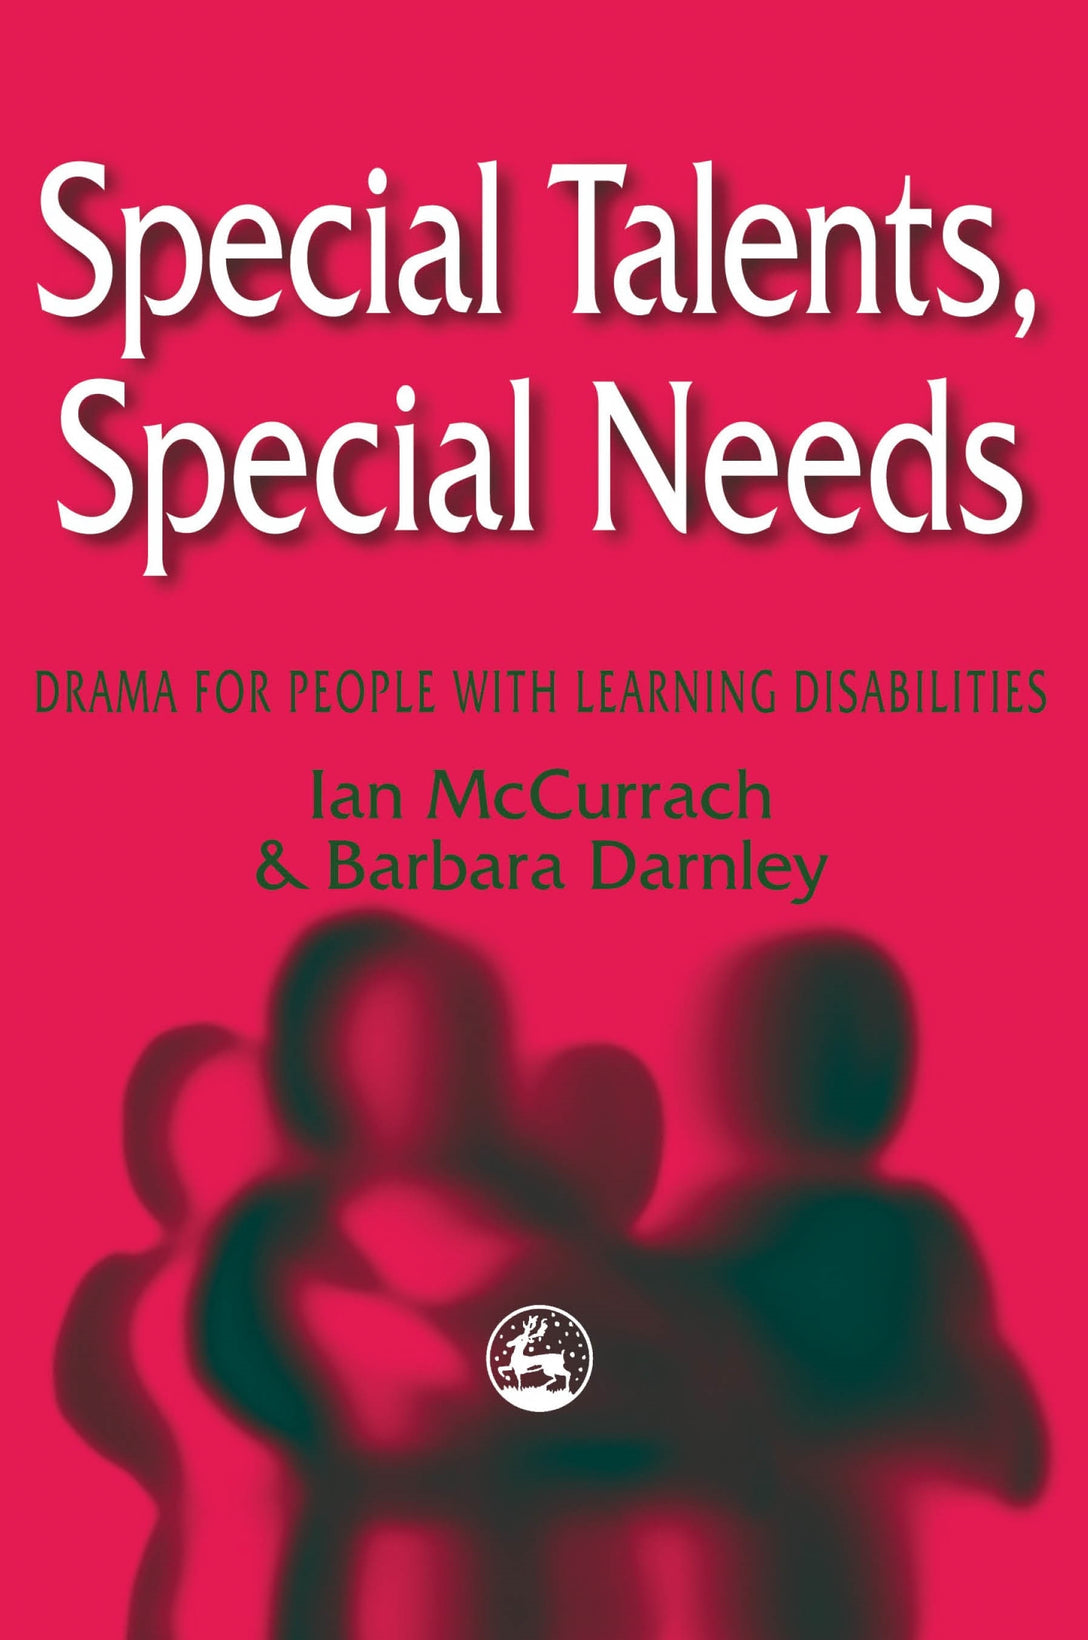 Special Talents, Special Needs by Barbara Darnley, Ian McCurrach